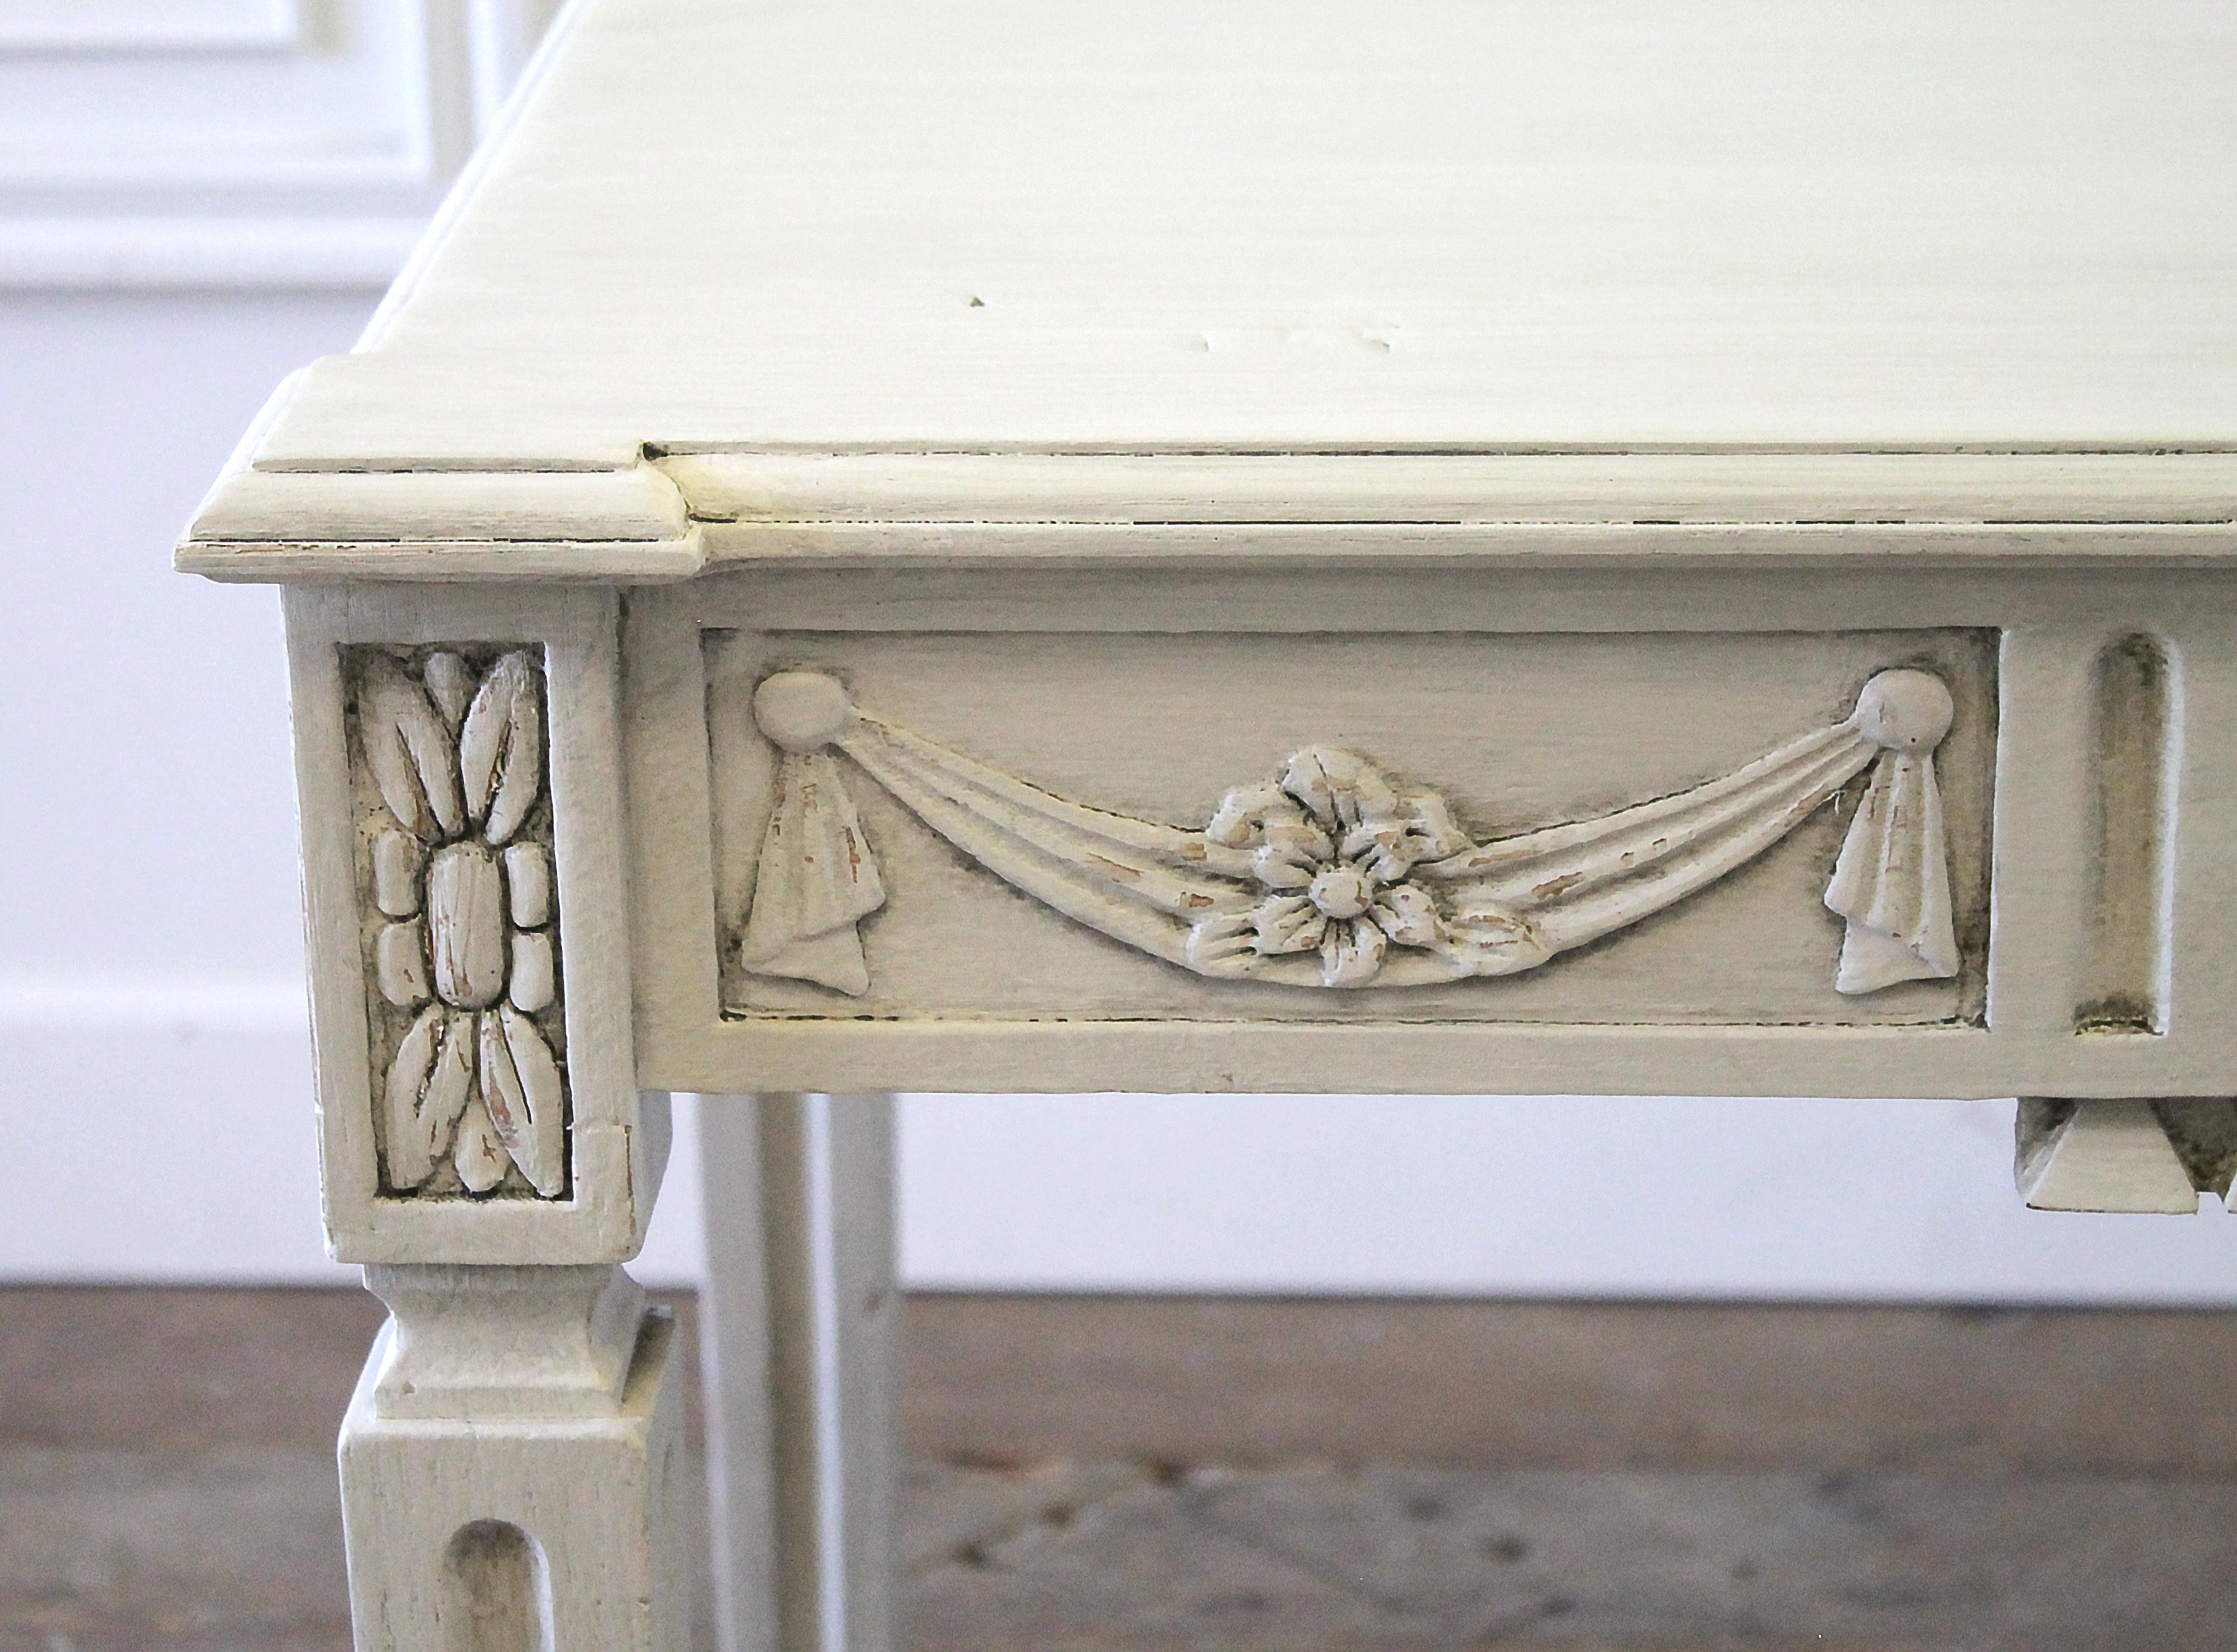 Vintage accent side table painted in a soft oyster white, with subtle distressed edges, and finished with an antique glazed patina. This table is made from solid wood, very sturdy.
Measures:
32